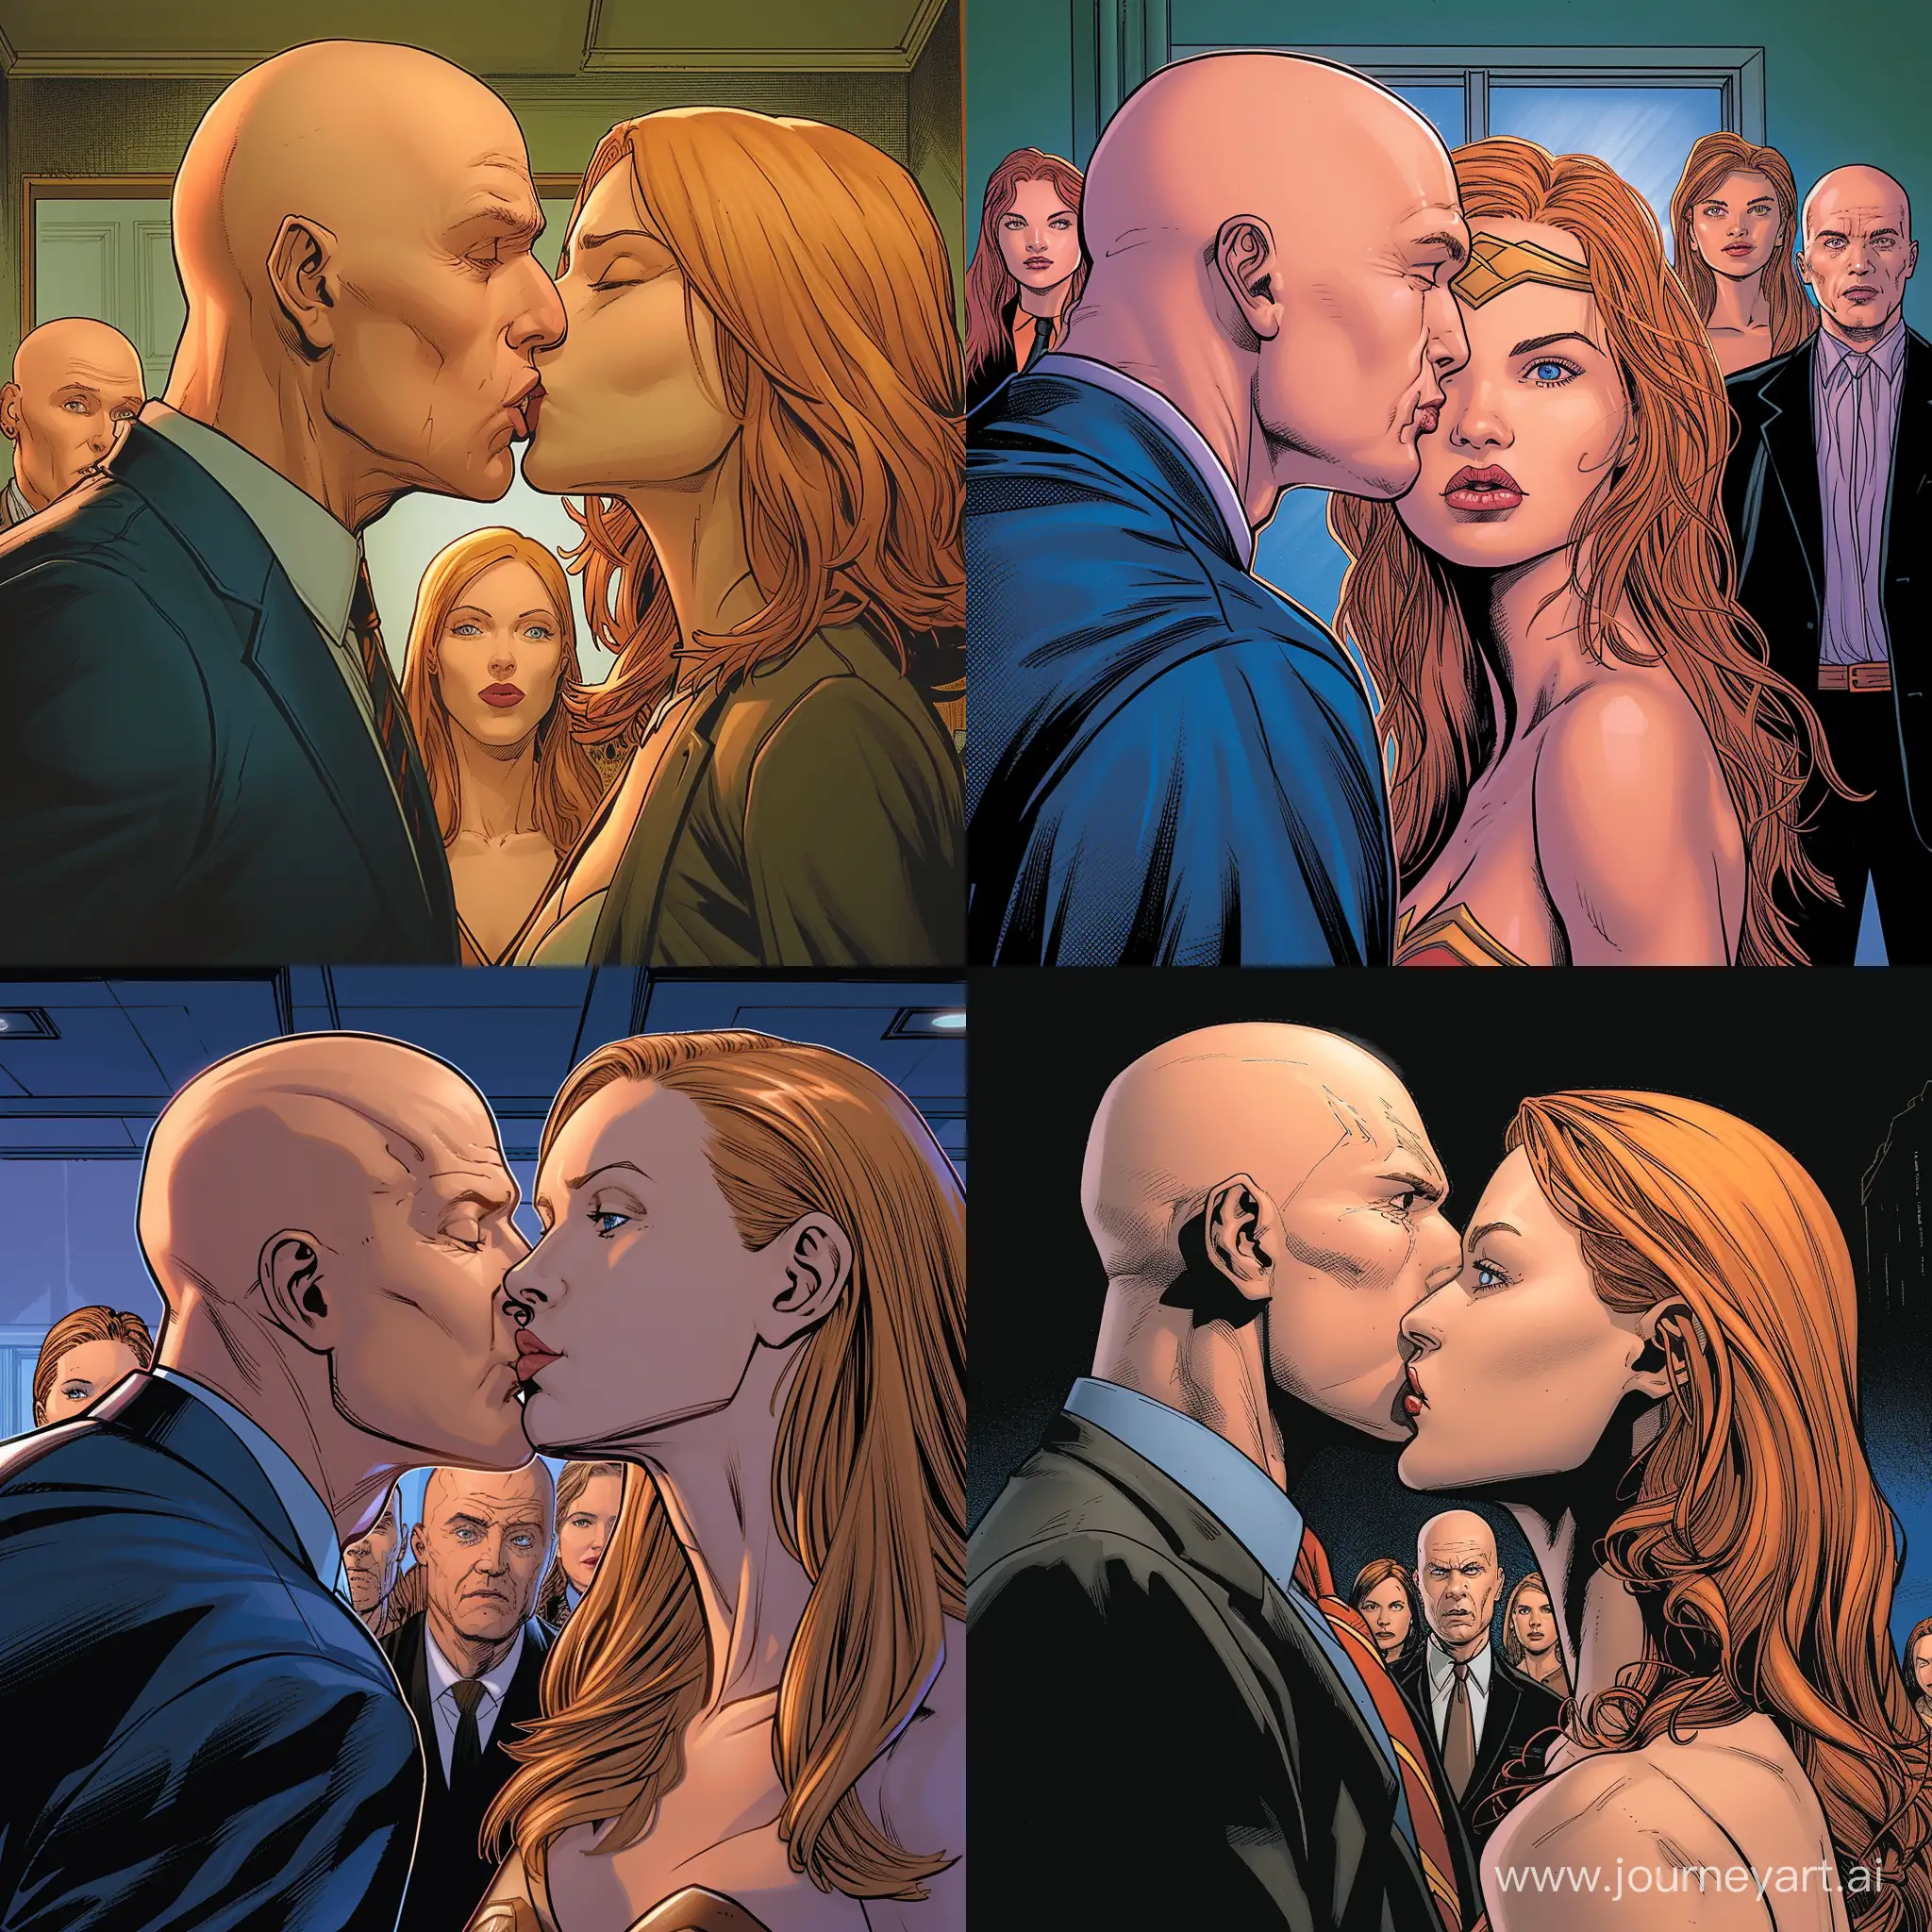 Lex Luthor, in a buisness suit, bald kissing a woman . The woman has a light-medium golden complexion, a squared face shape, full lips, blue eyes, dirty blonde eyebrows arched toward the tail, a button nose, and long, straight strawberry blonde hair with wispy bangs. Meanwhile, Martha Kent (Annette O’Toole version), Jonathan Kent (John Schneider version), Clark Kent (Tom Welling version), Lois Lane (Erica Durance version), Chloe Sullivan (Allison Mack version), and Kara Zor-El (Laura Vandervoort version) are all watching in horror.